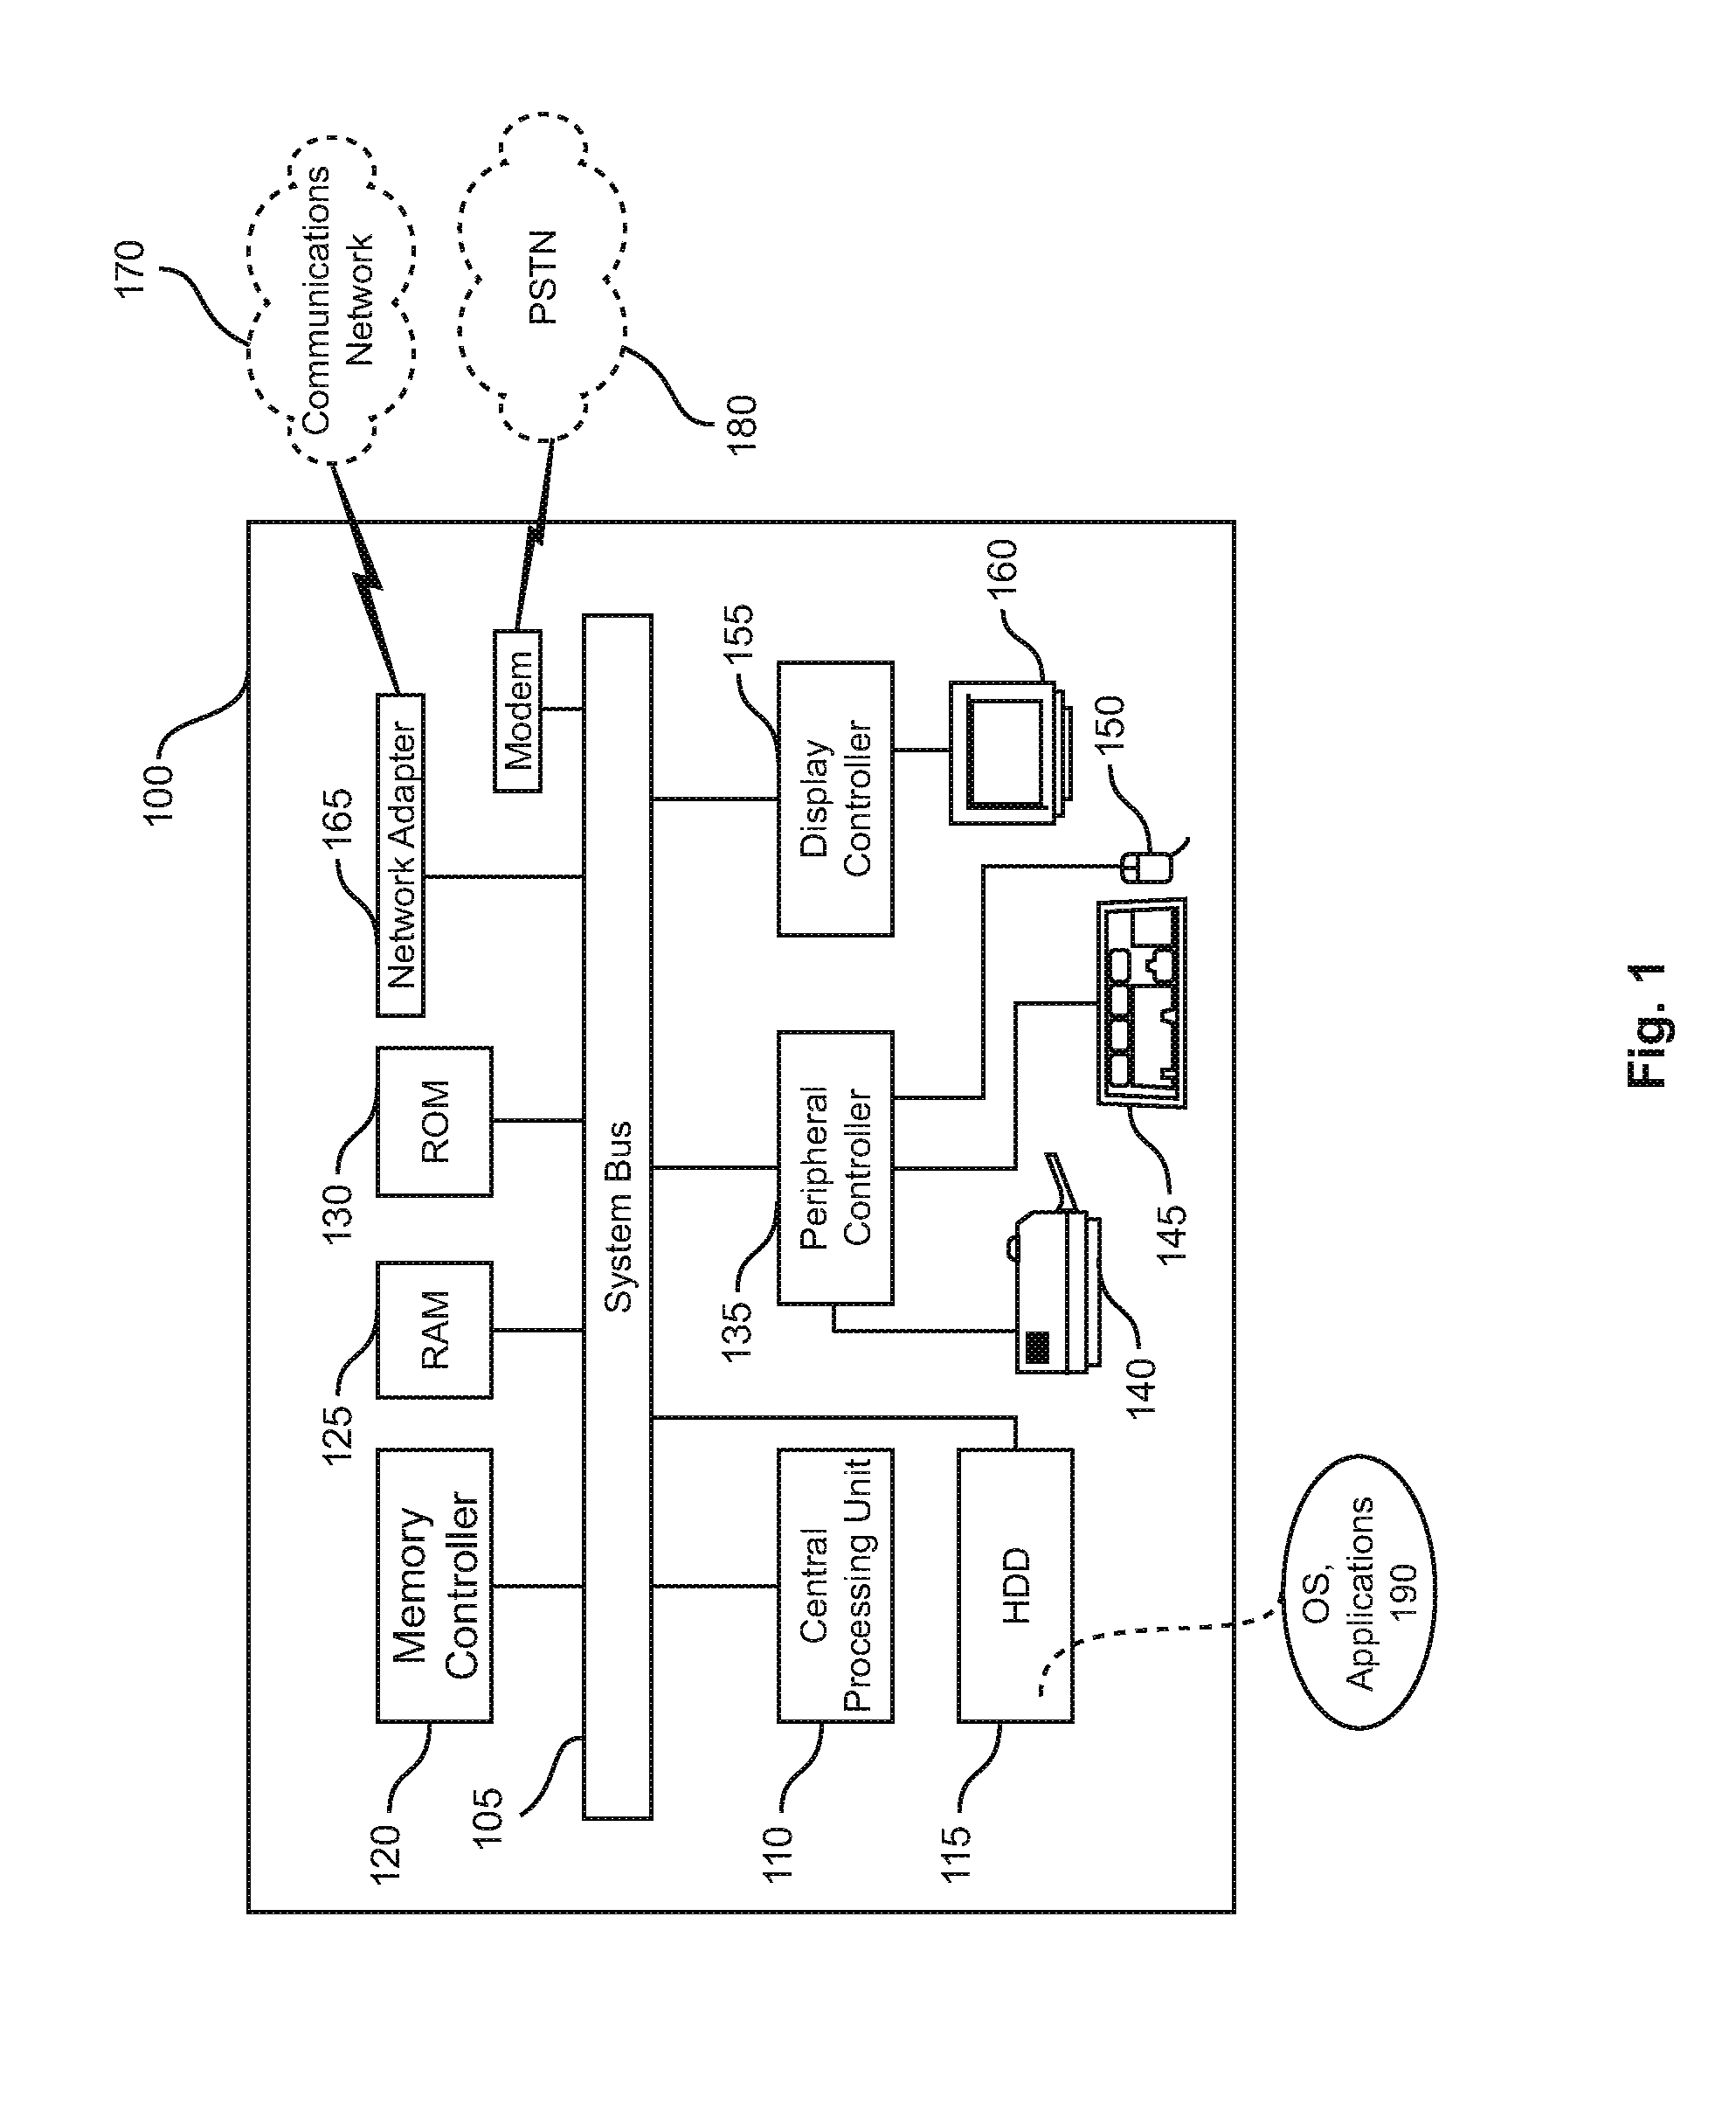 Engine, system and method of providing business valuation and database services using alternative payment arrangements